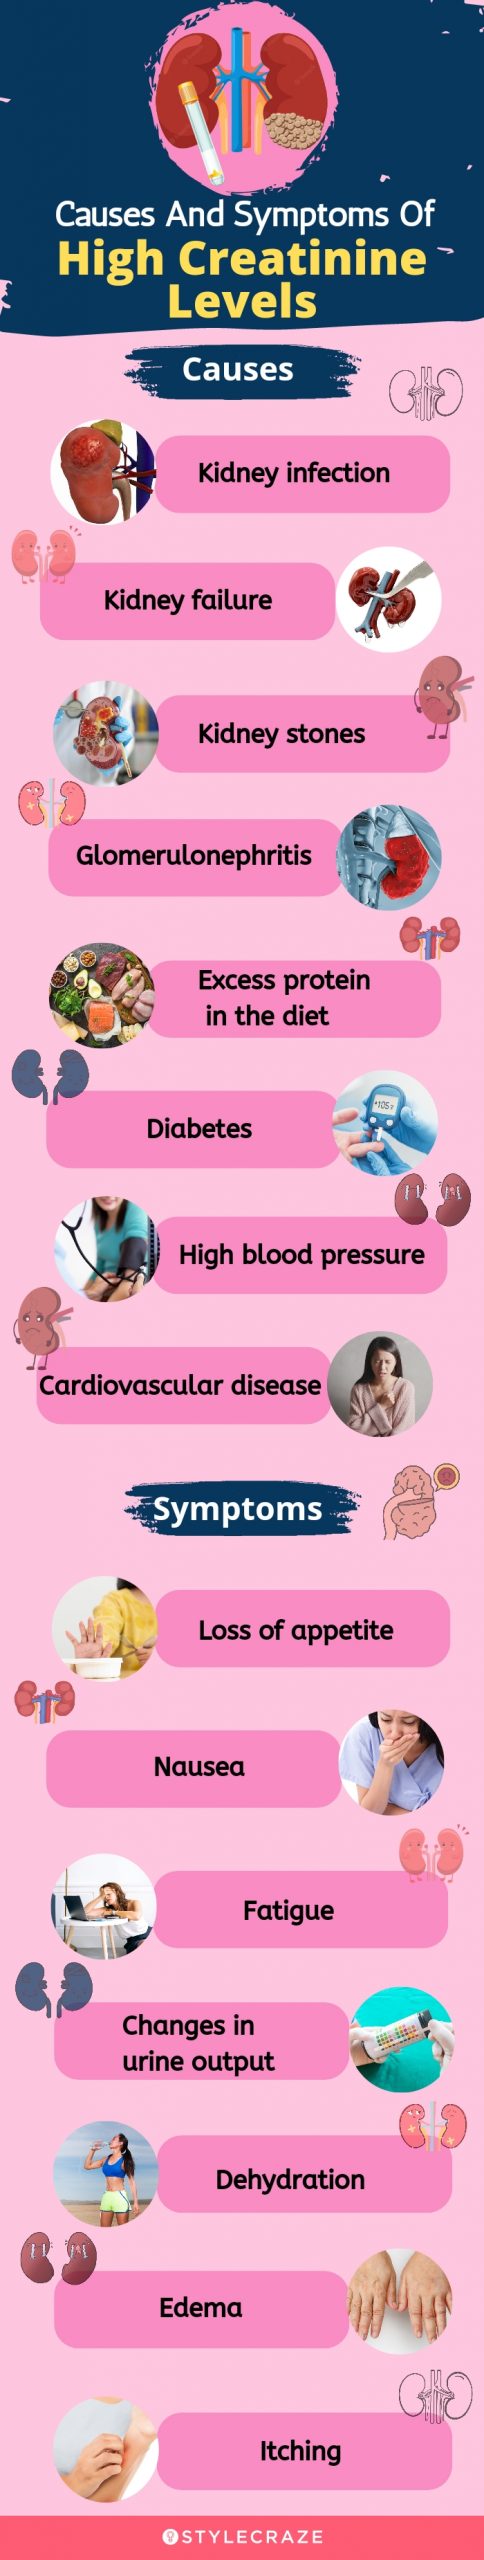 causes and symptoms of high creatinine levels (infographic)